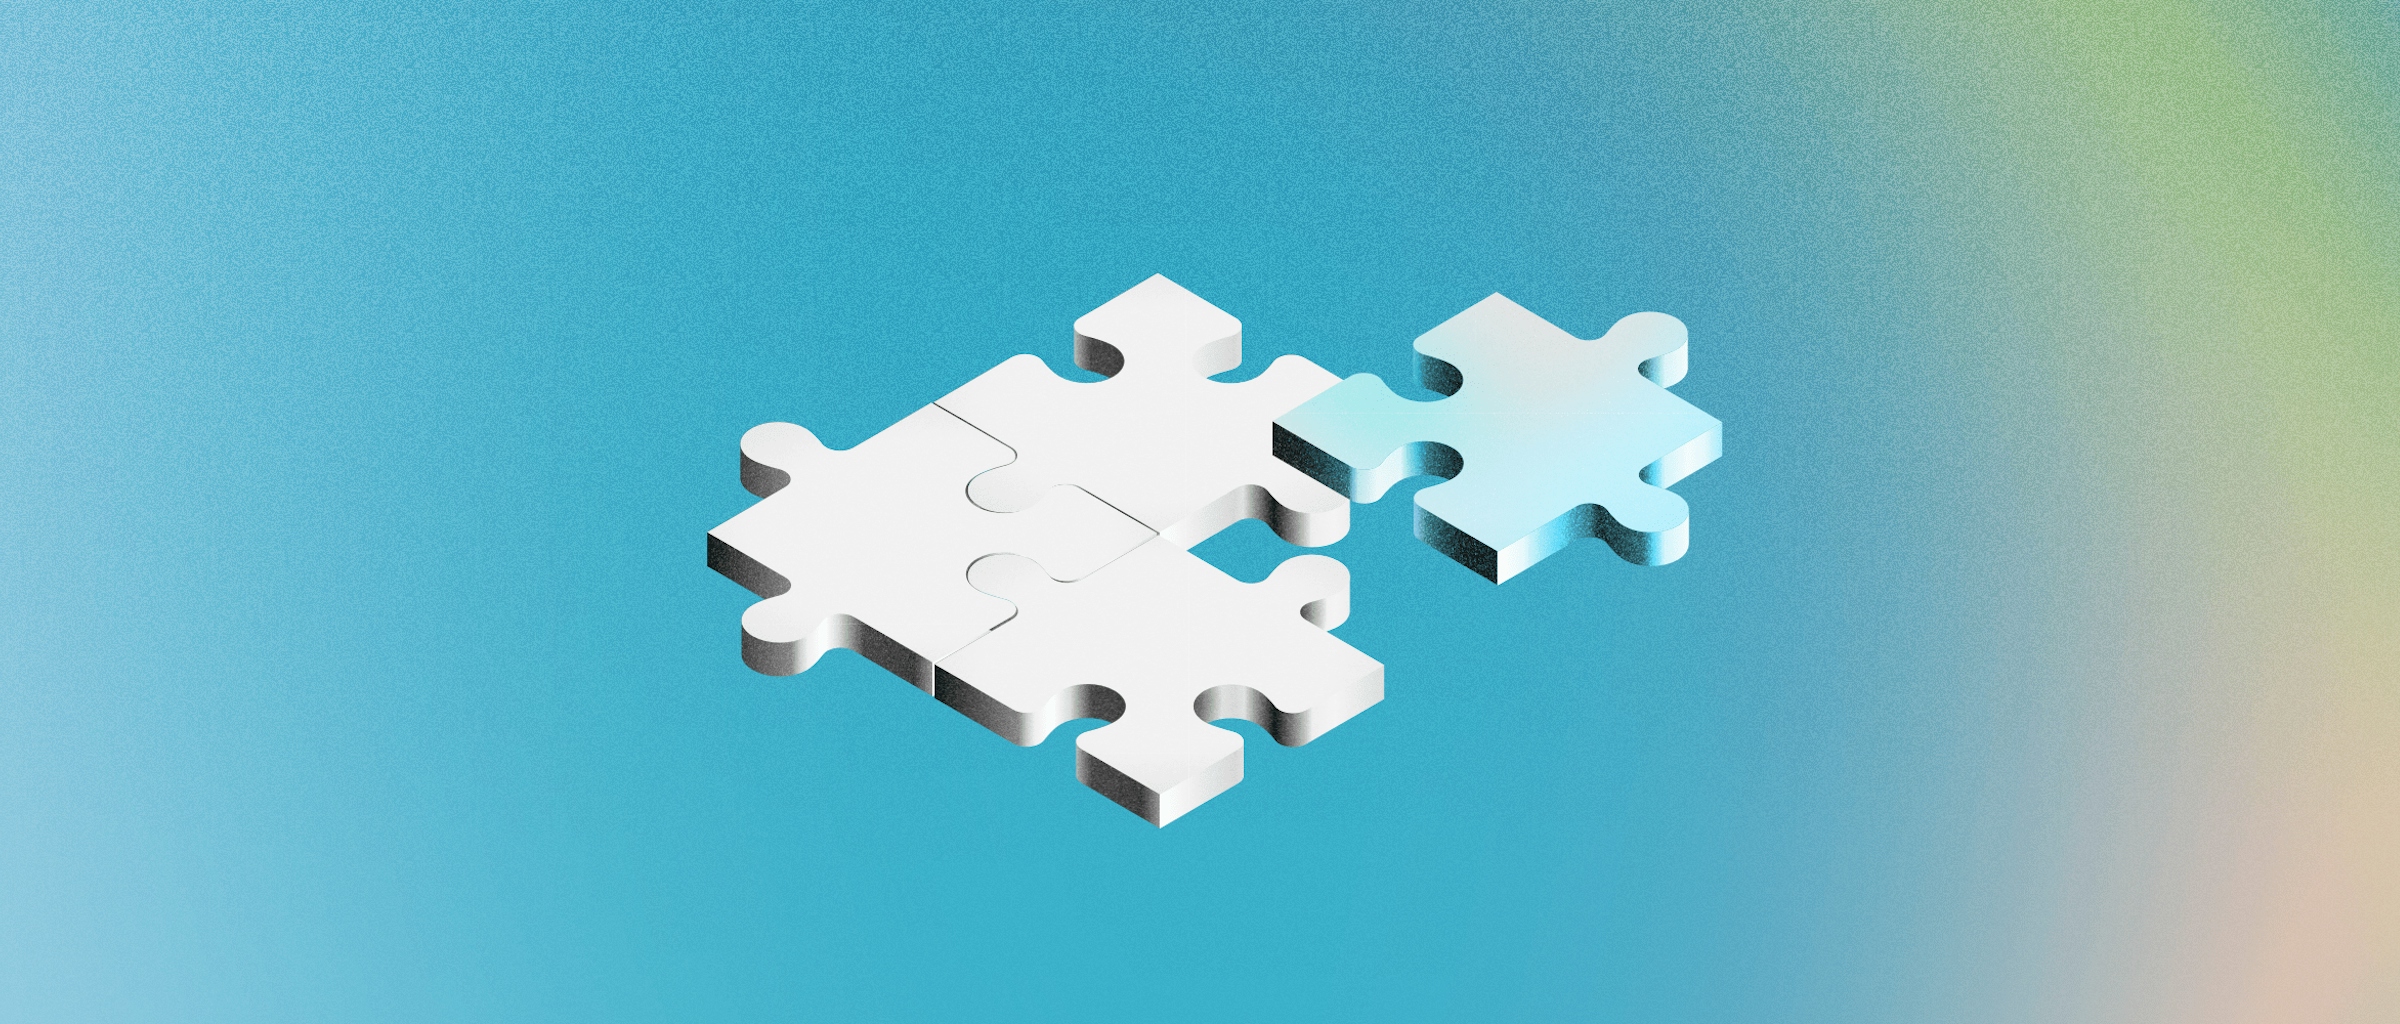 Image showing a jigsaw puzzle over a blue background.